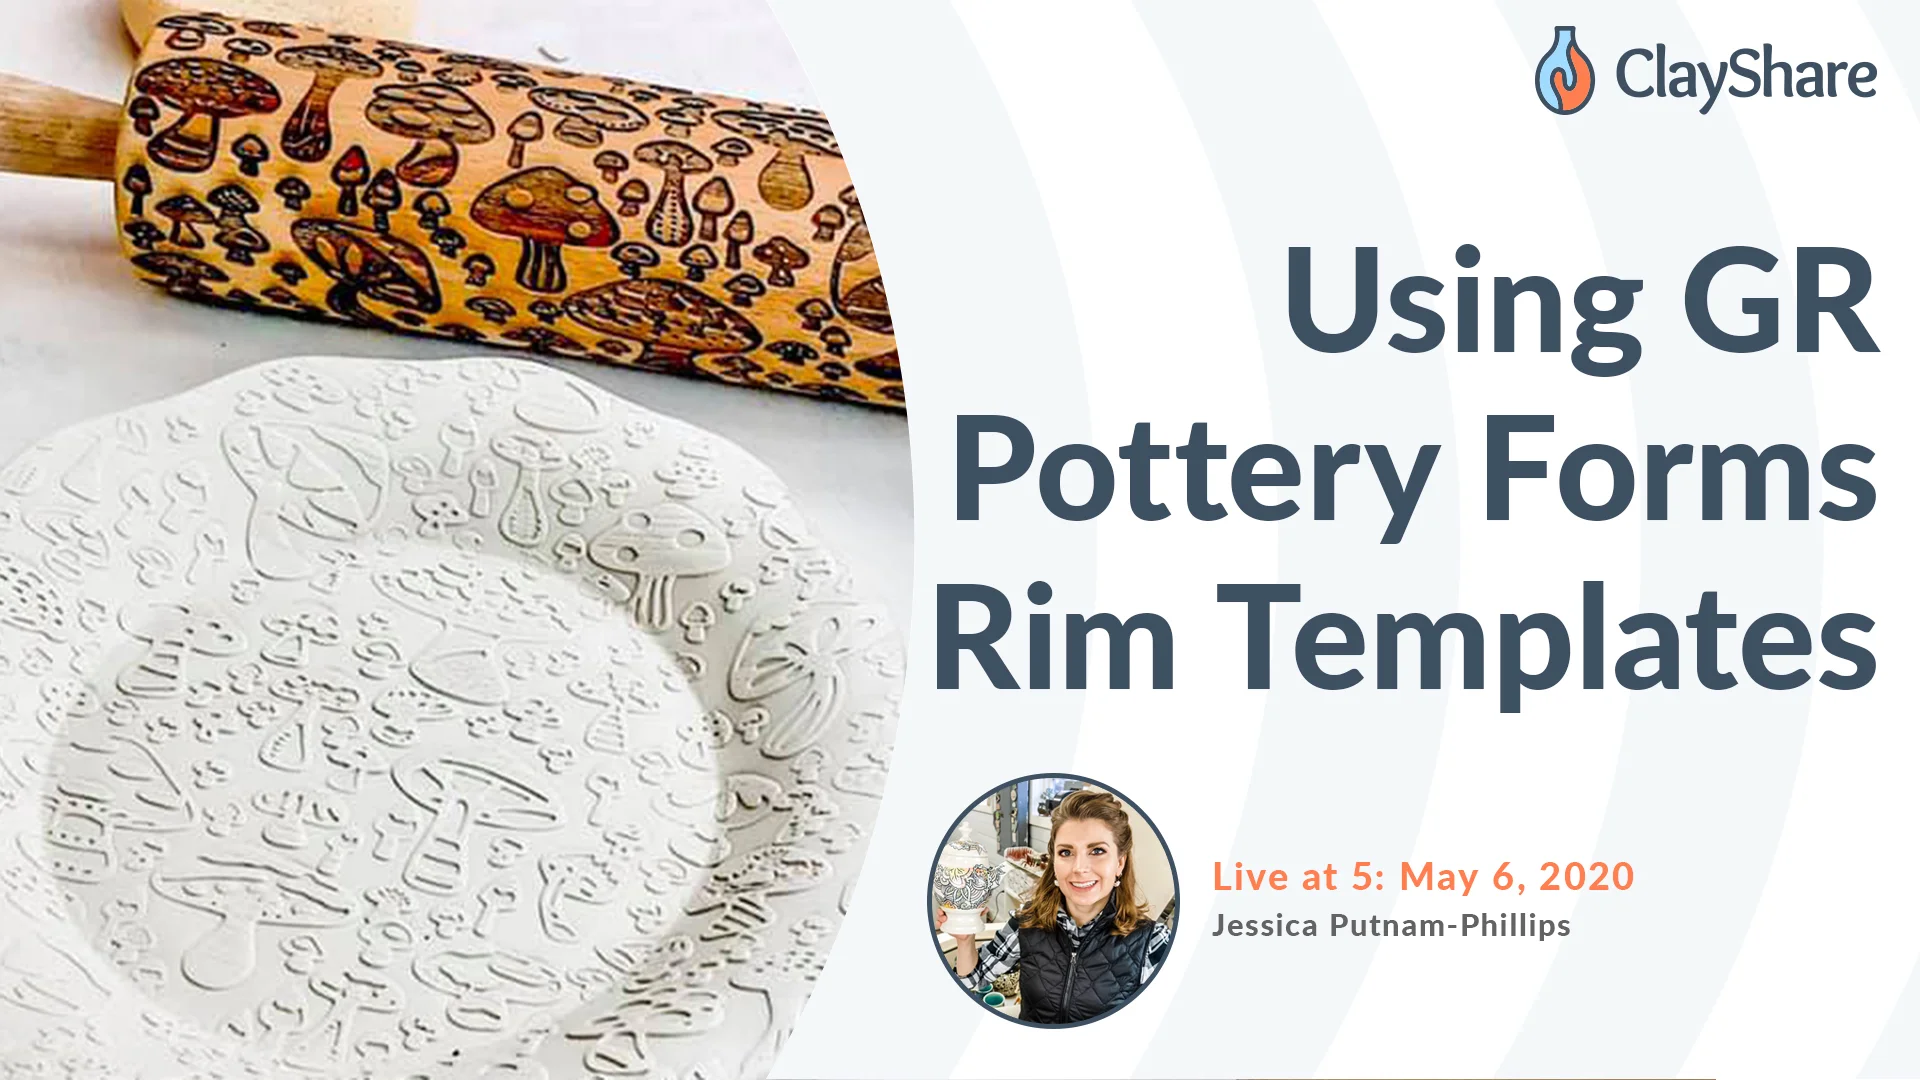 Using GR Pottery Forms Rim Template on Vimeo